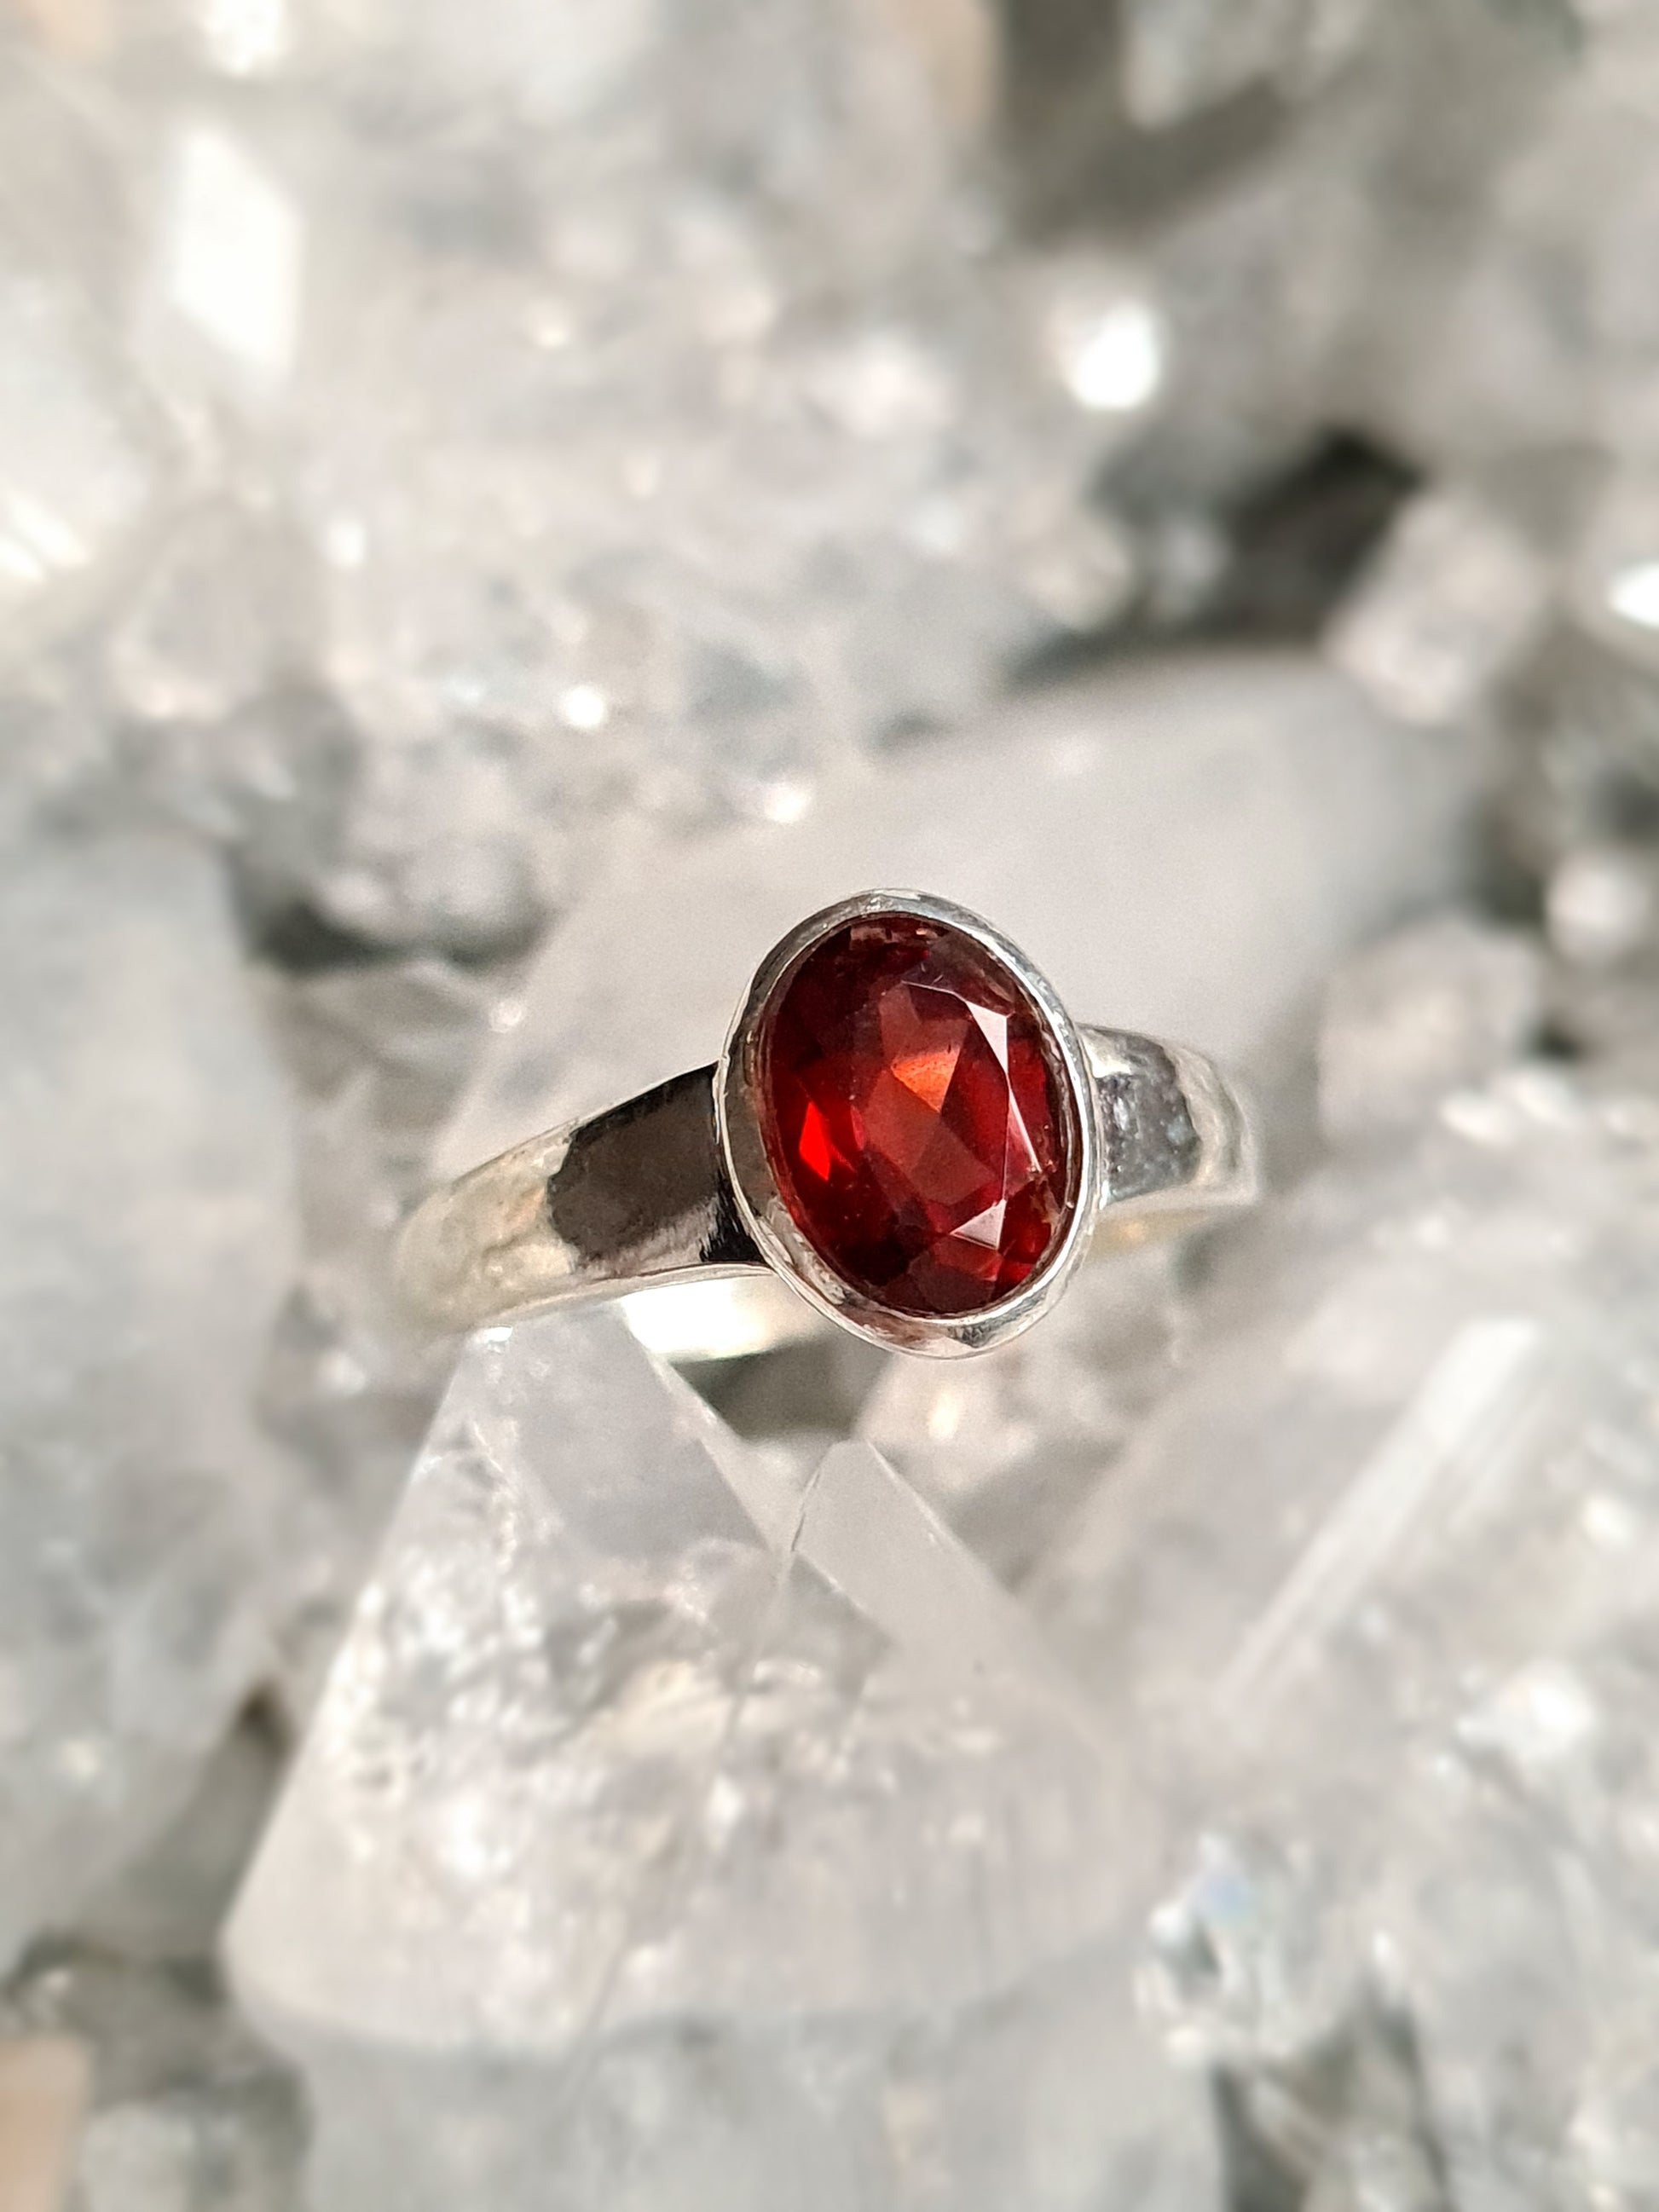 A sterling silver ring set with an oval faceted red garnet. Sizes N and P.5 available